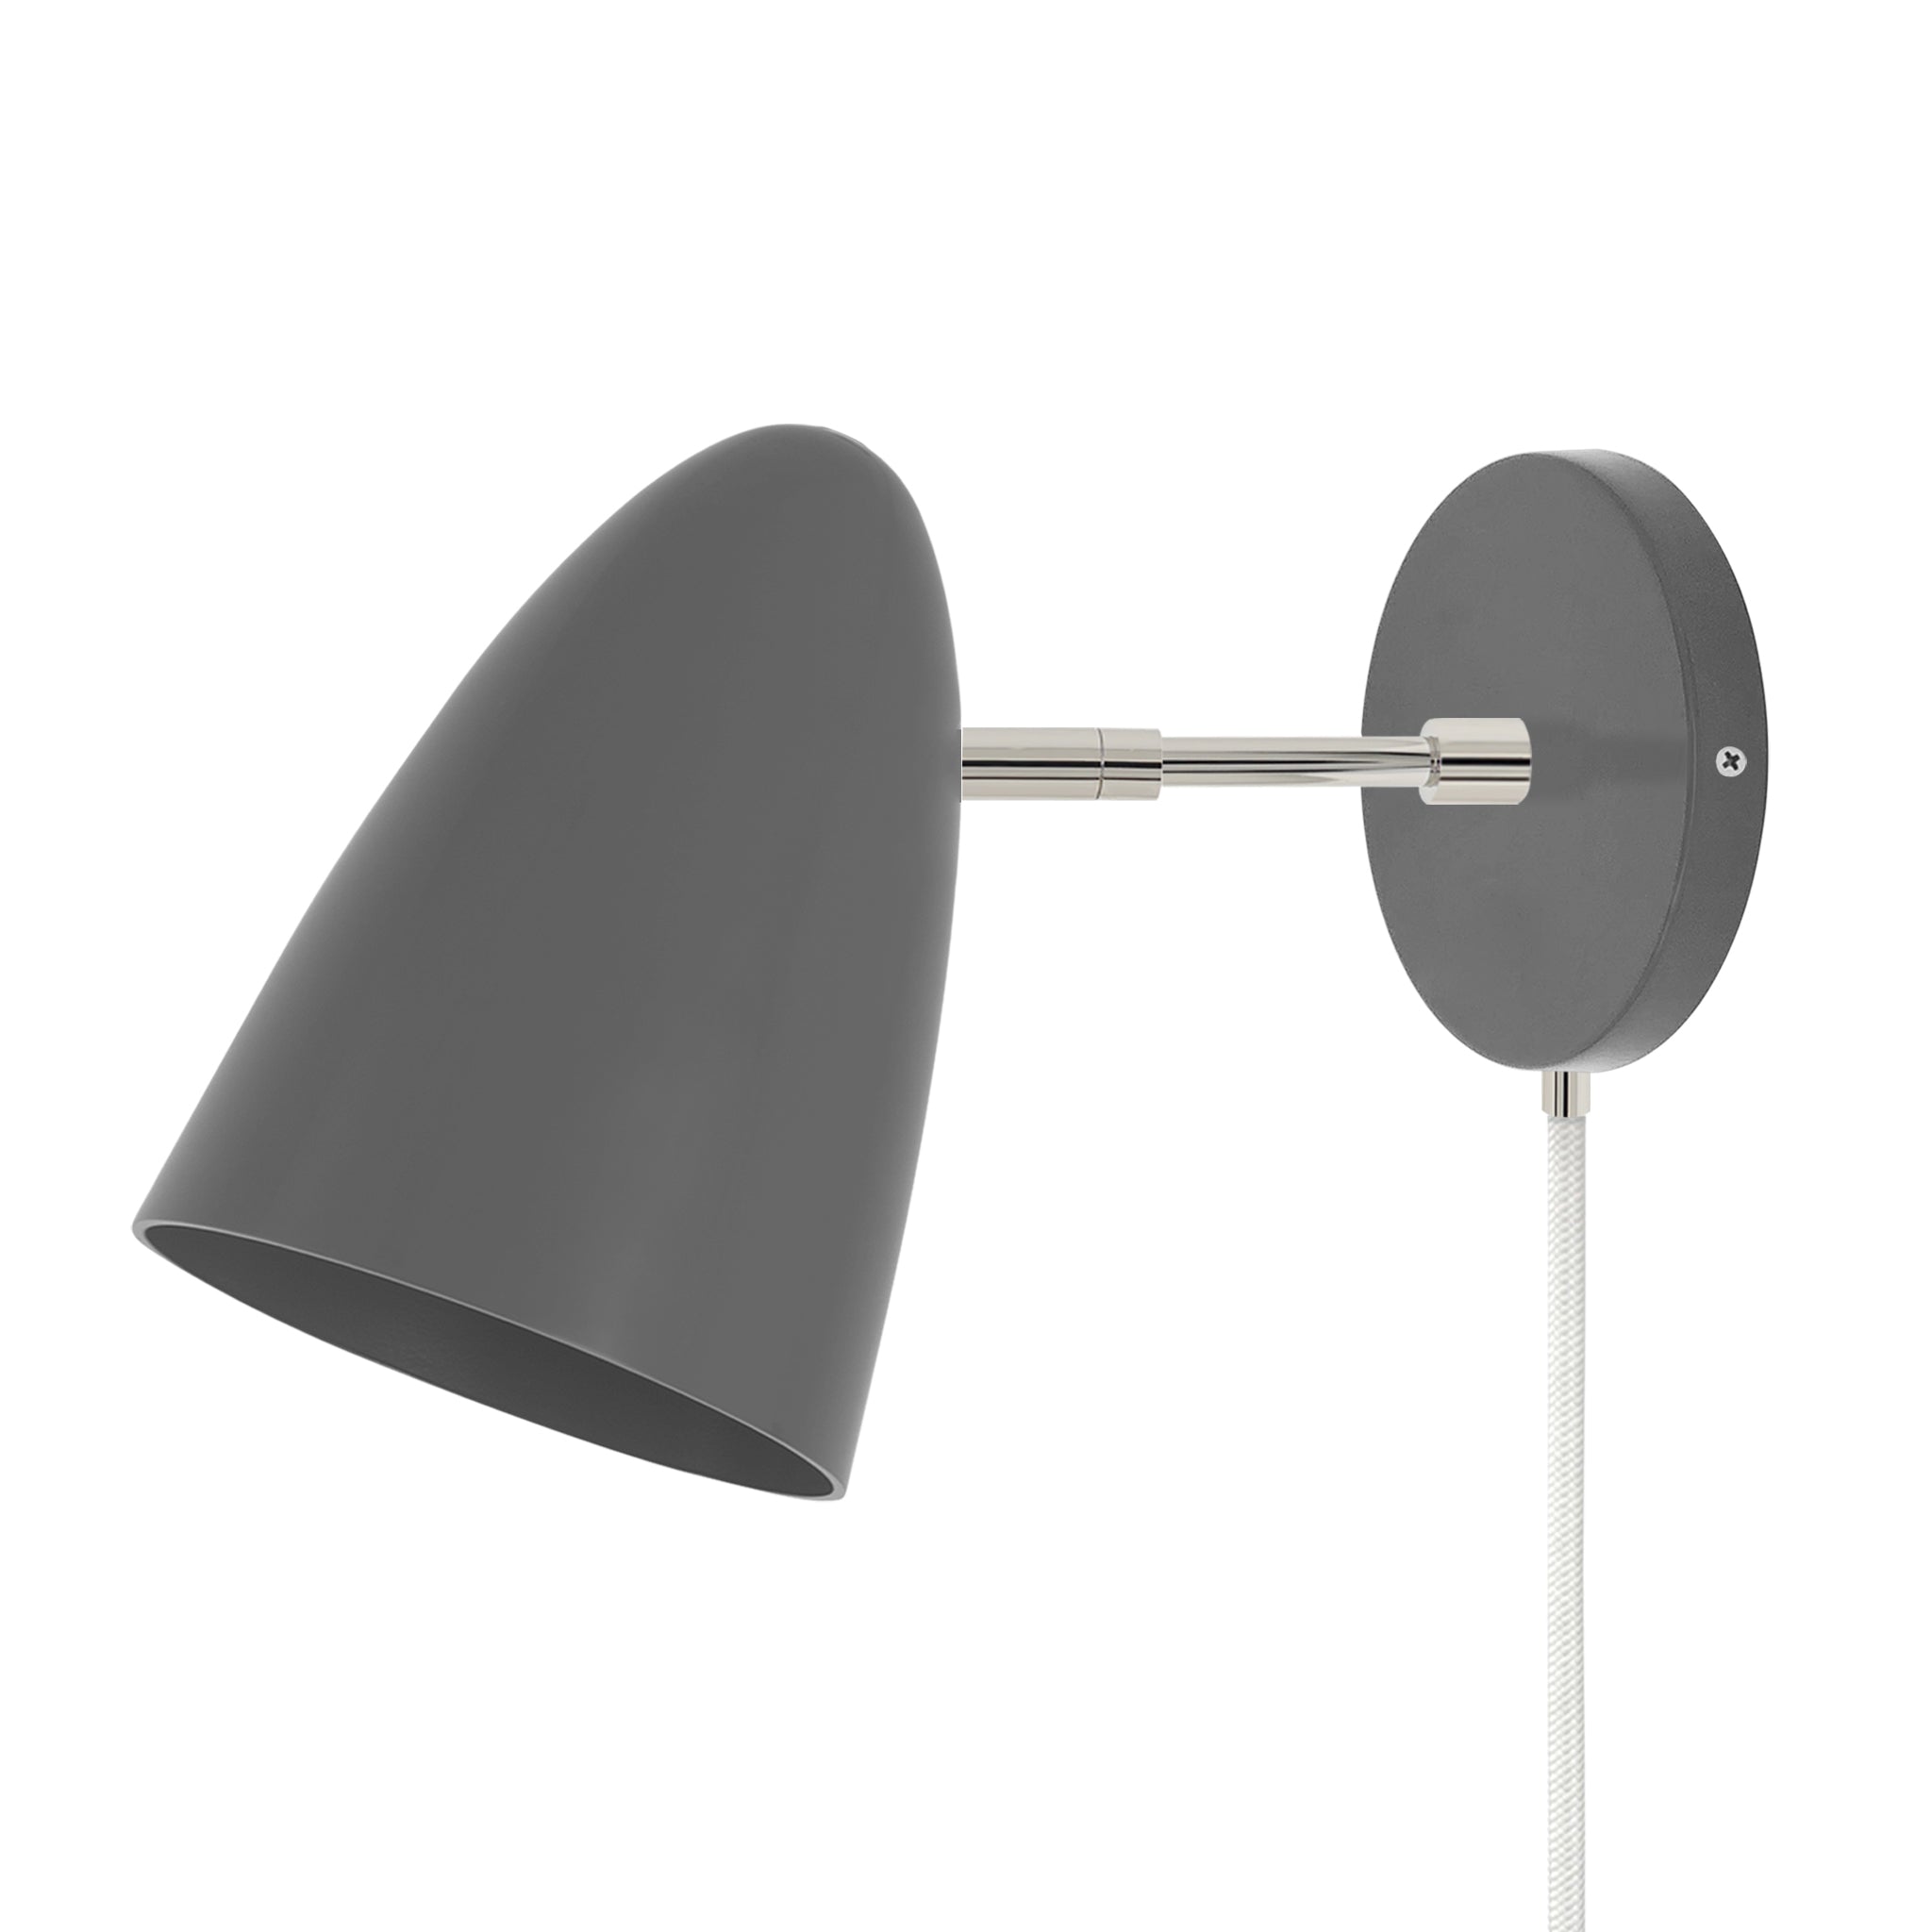 Nickel and charcoal color Boom plug-in sconce 3" arm Dutton Brown lighting